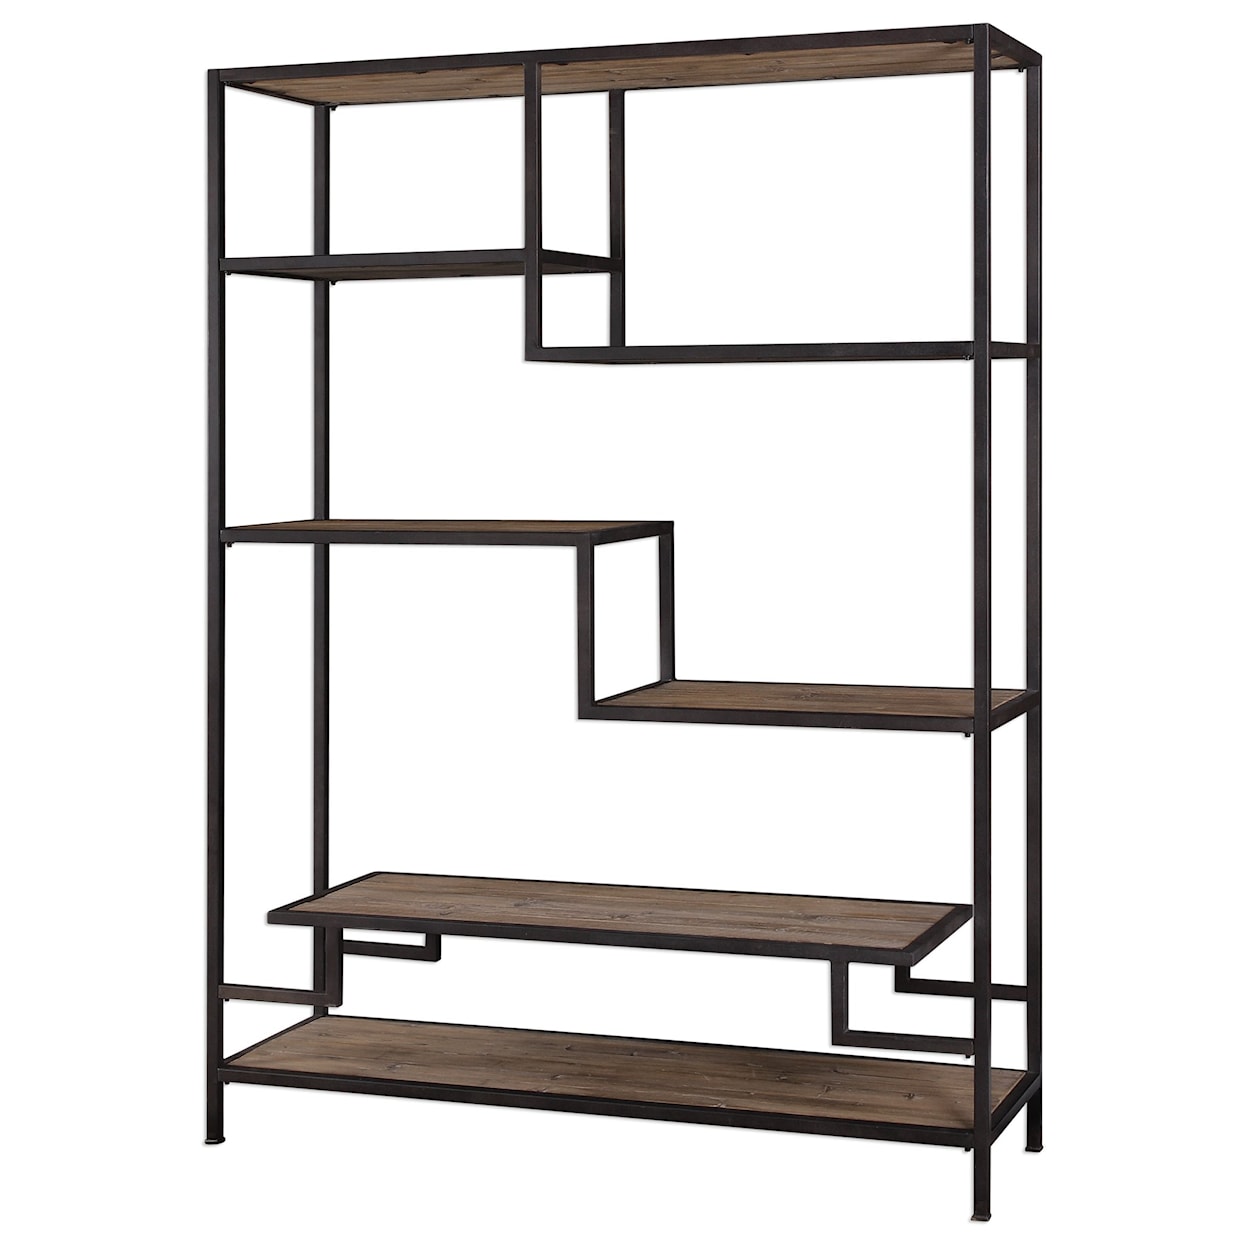 Uttermost Accent Furniture - Bookcases Sherwin Industrial Etagere